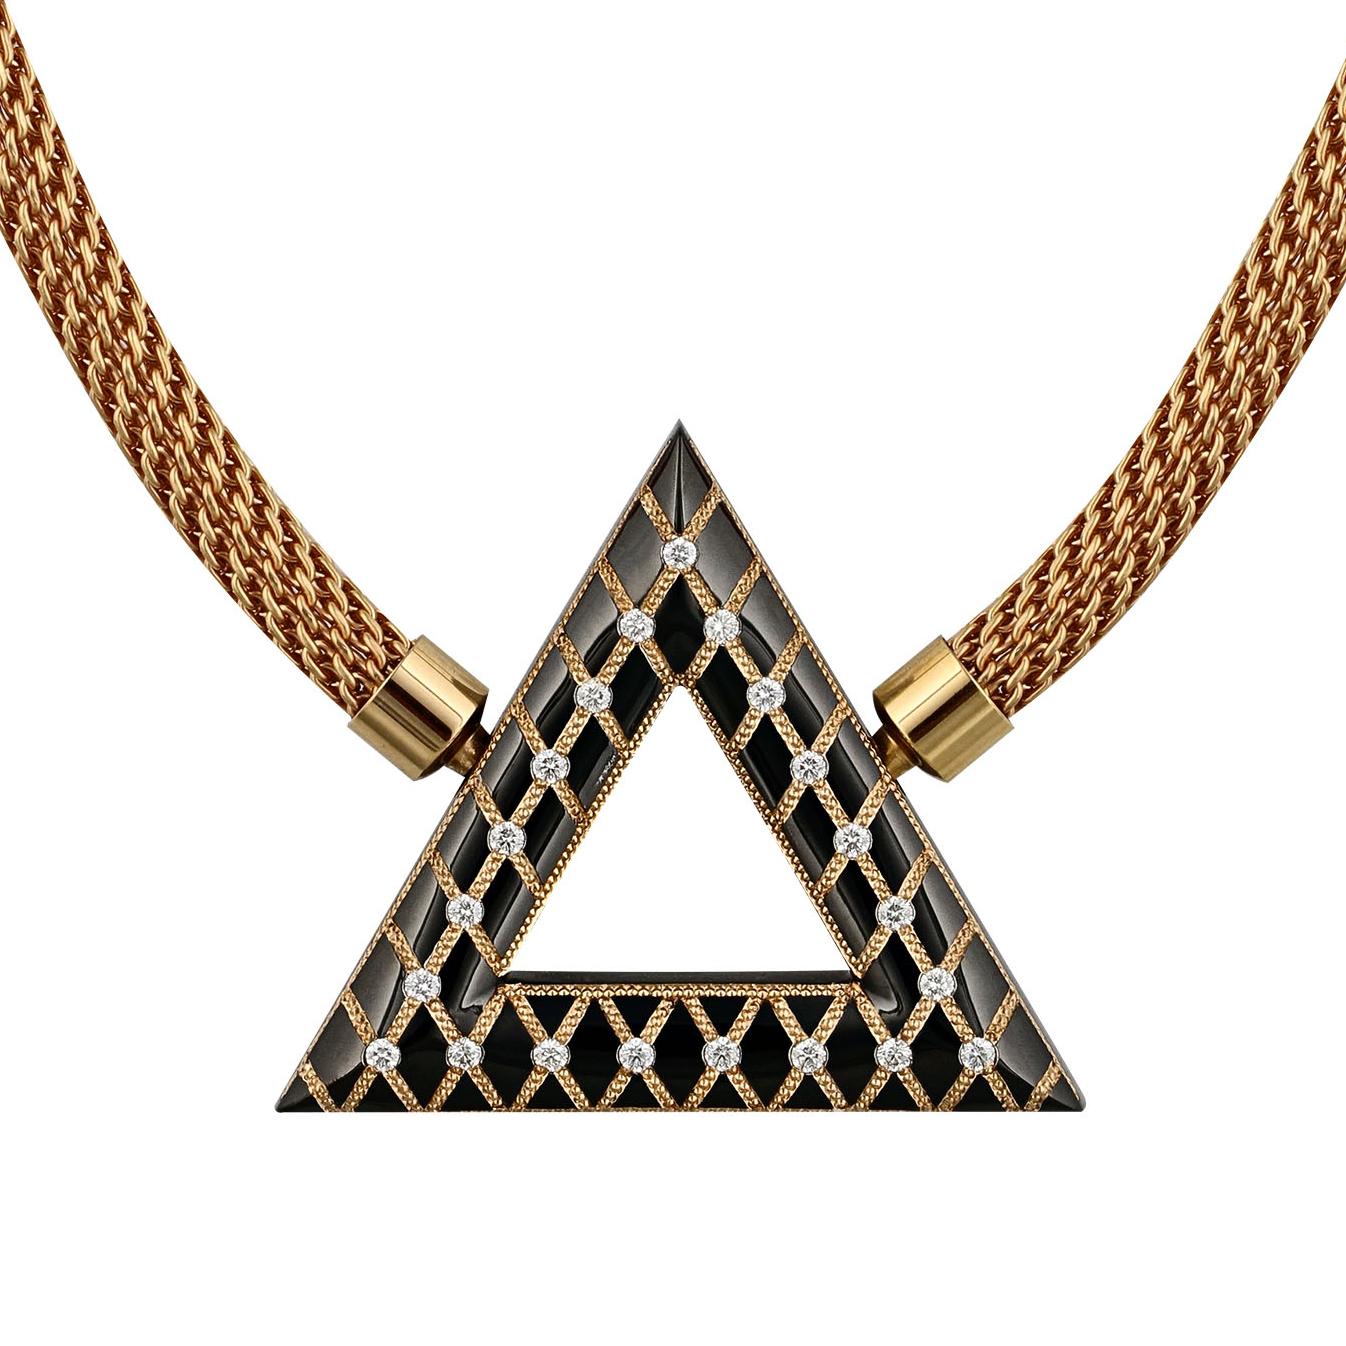 Women's or Men's Geometric Pyramid Shaped Rose Gold Inlaid Pendant by Zoltan David For Sale